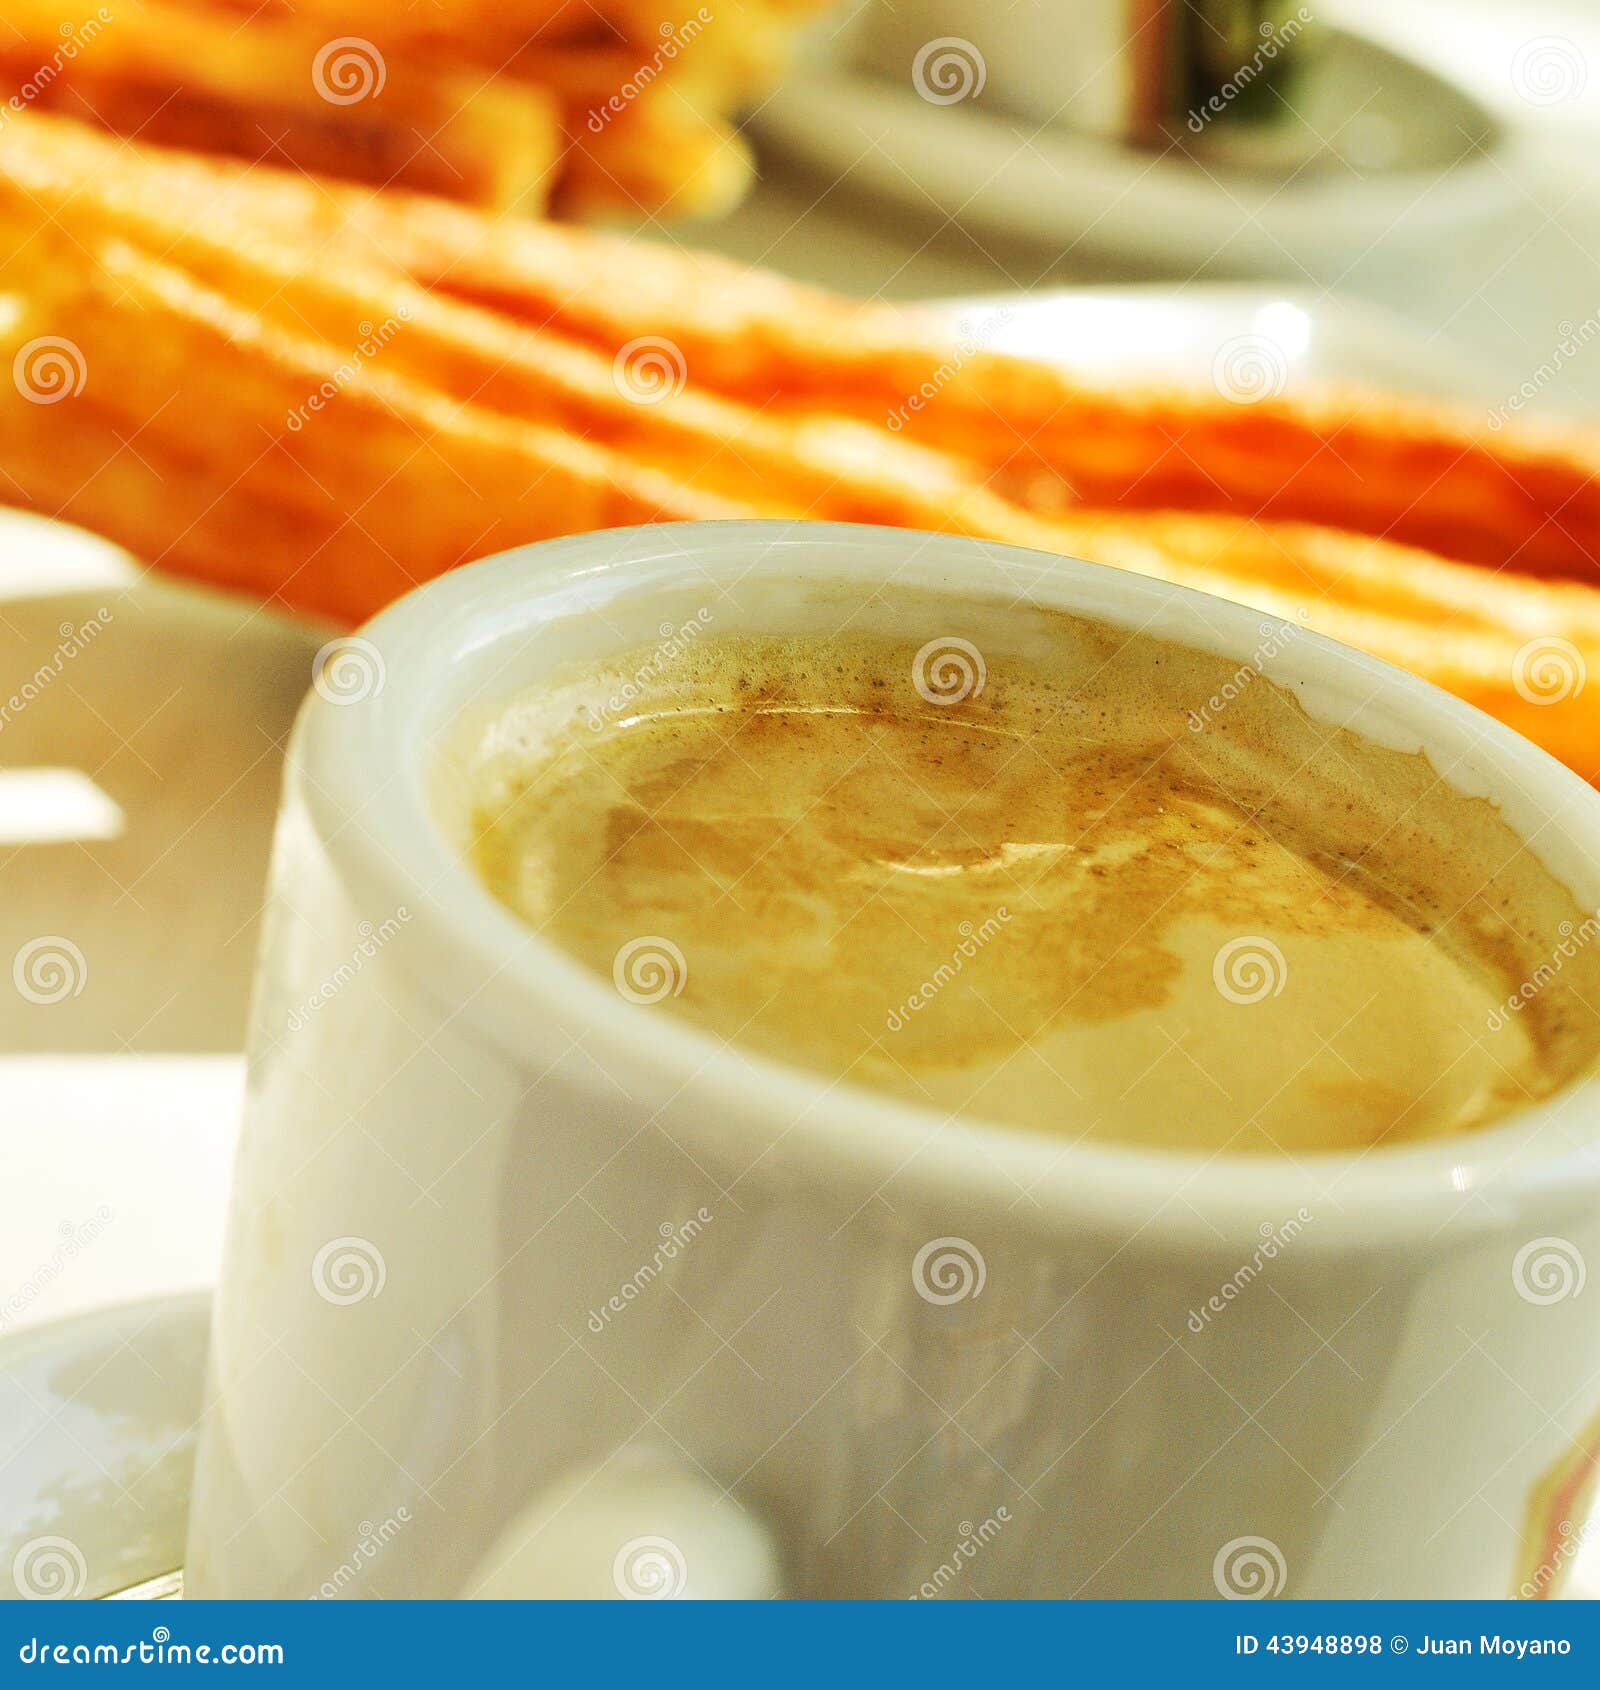 cafe y porras, coffee and thick churros, the typical breakfast i